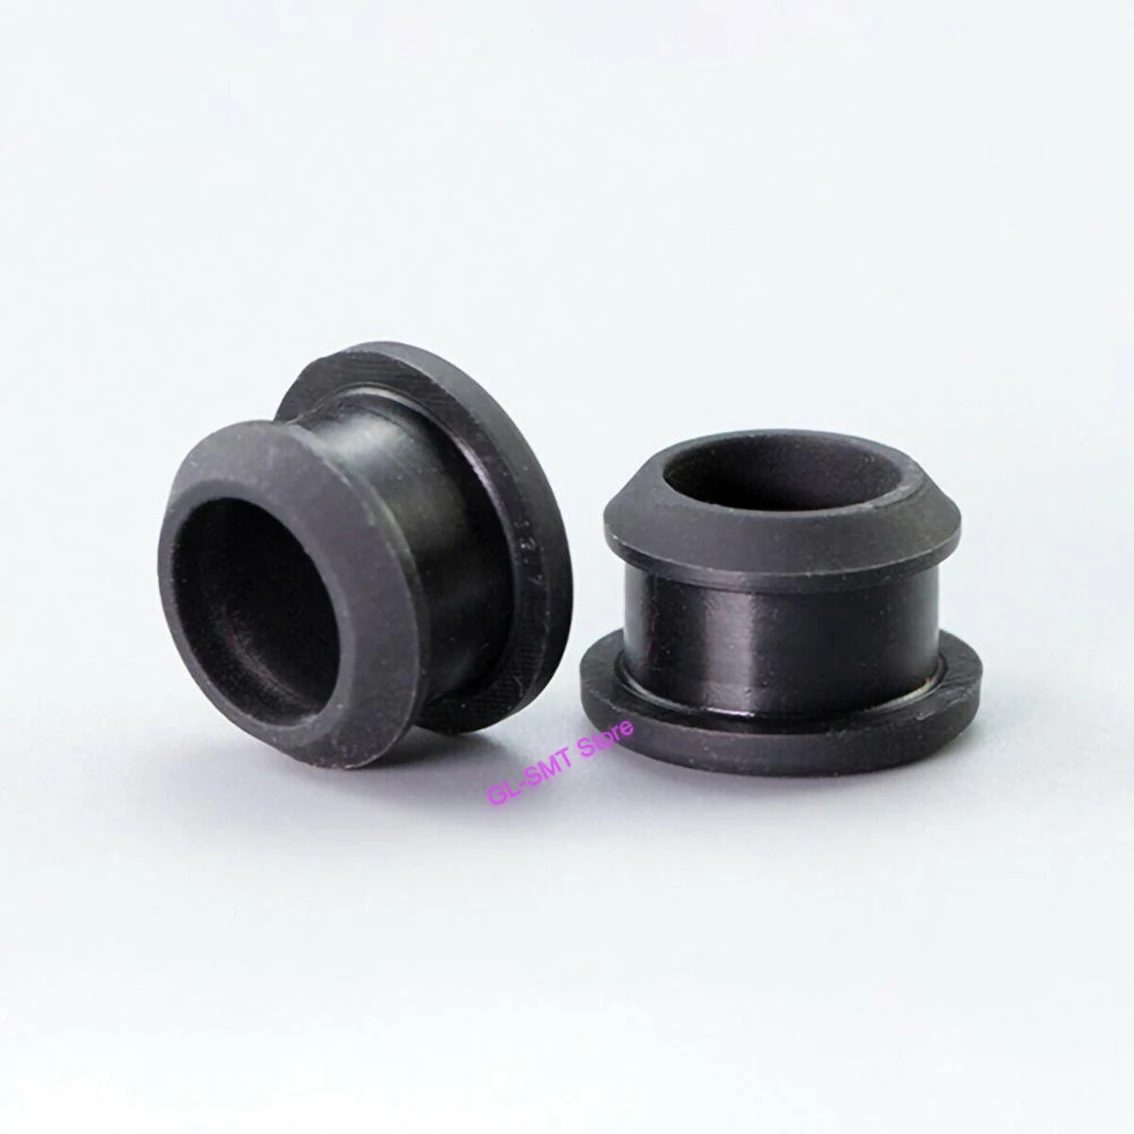 Black Silicone Rubber Hole Caps 4.5mm to 14mm T Type Plug Cover Snap-on Gasket Blanking End Caps Seal Stopper